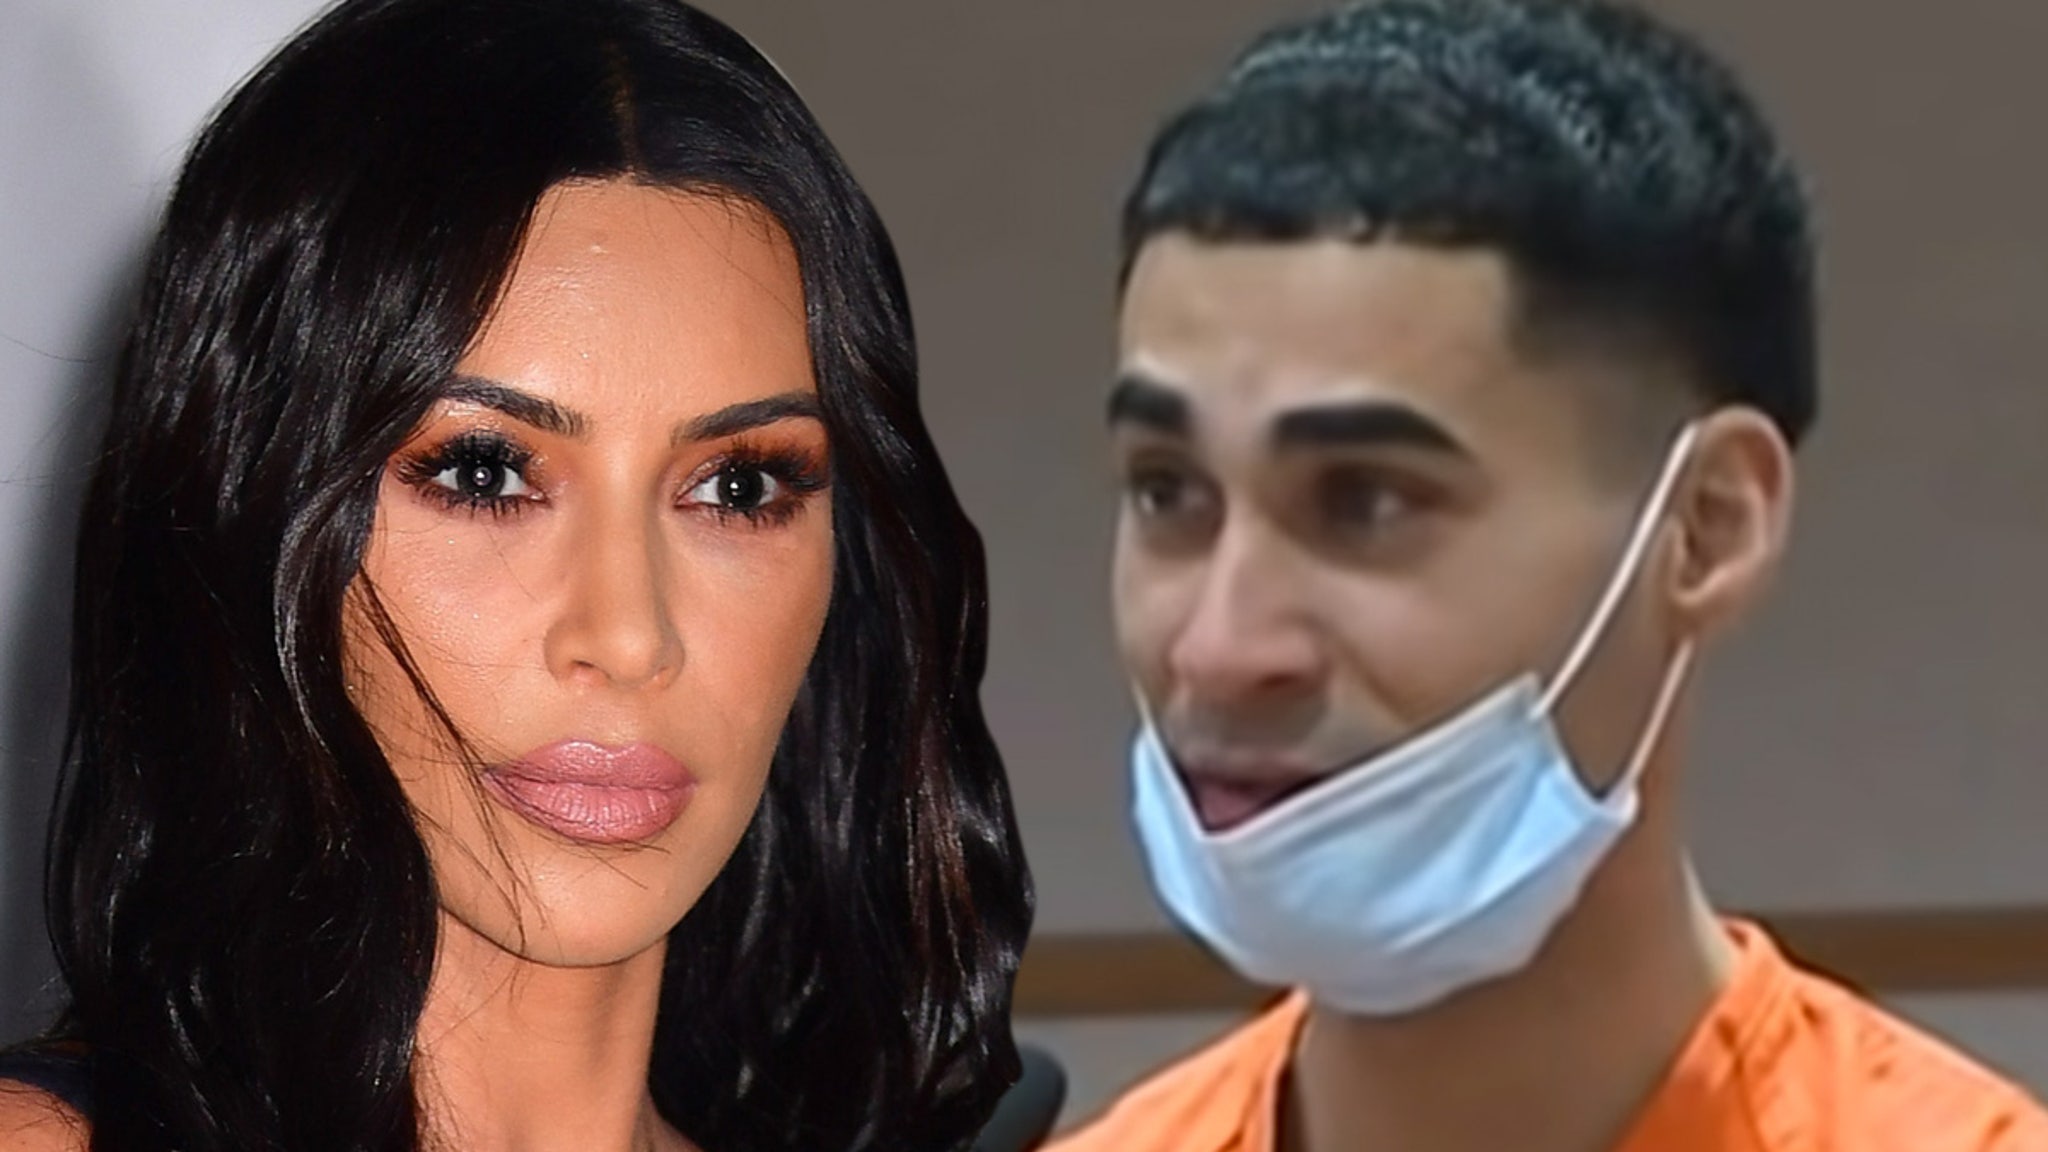 Kim Kardashian Praised by CO Truck Driver, Shamed By Victim's Wife as Loudmouth